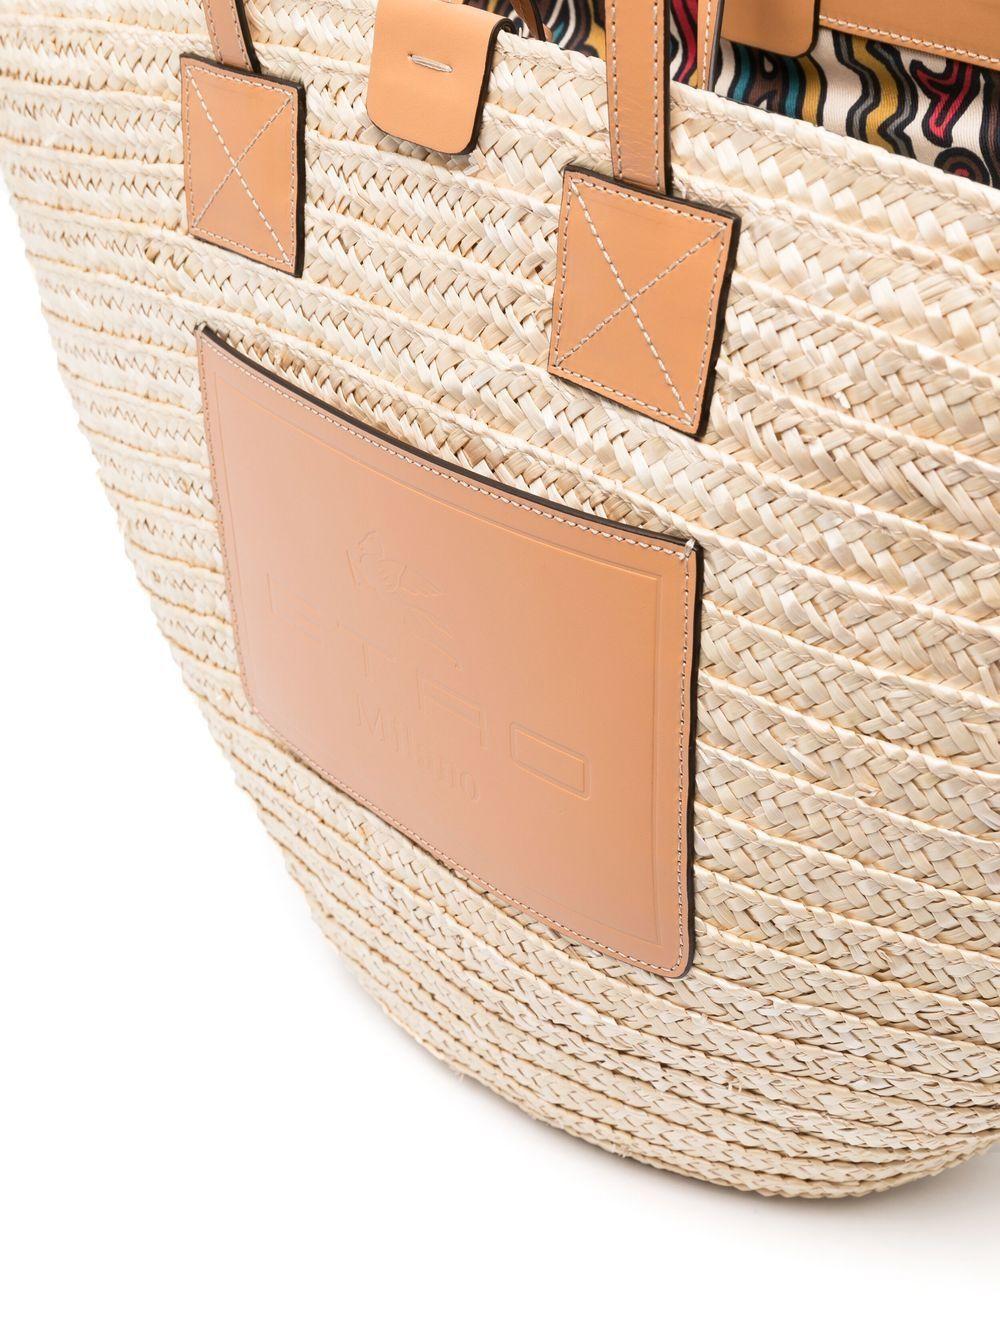 Etro Tote Bag In Woven Straw